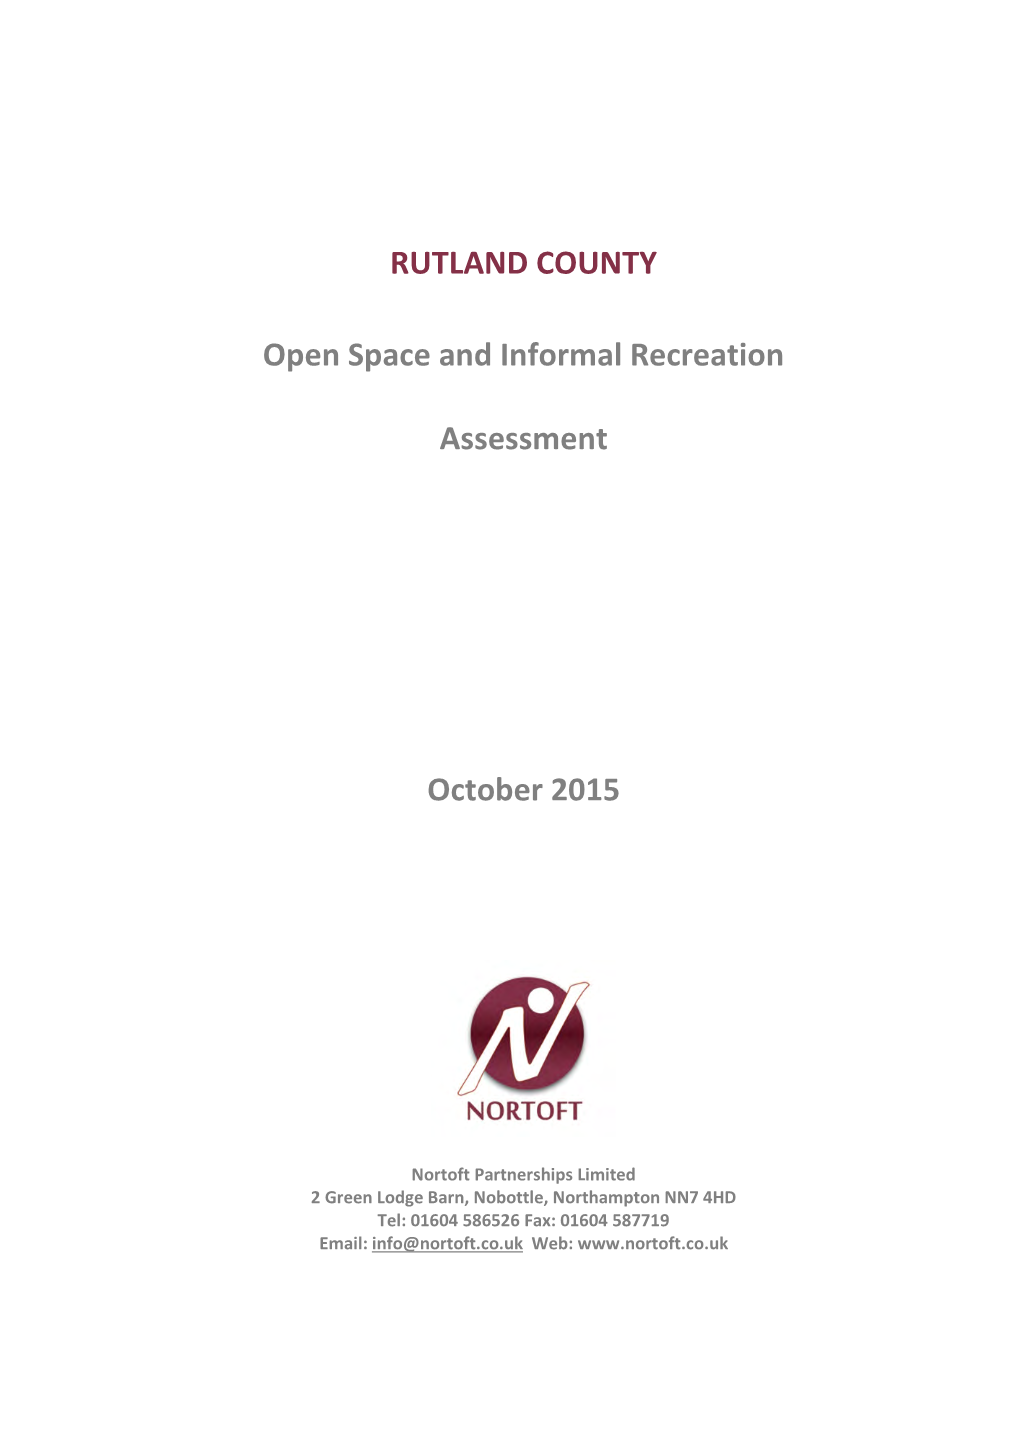 Open Space and Informal Recreation Assessment October 2015